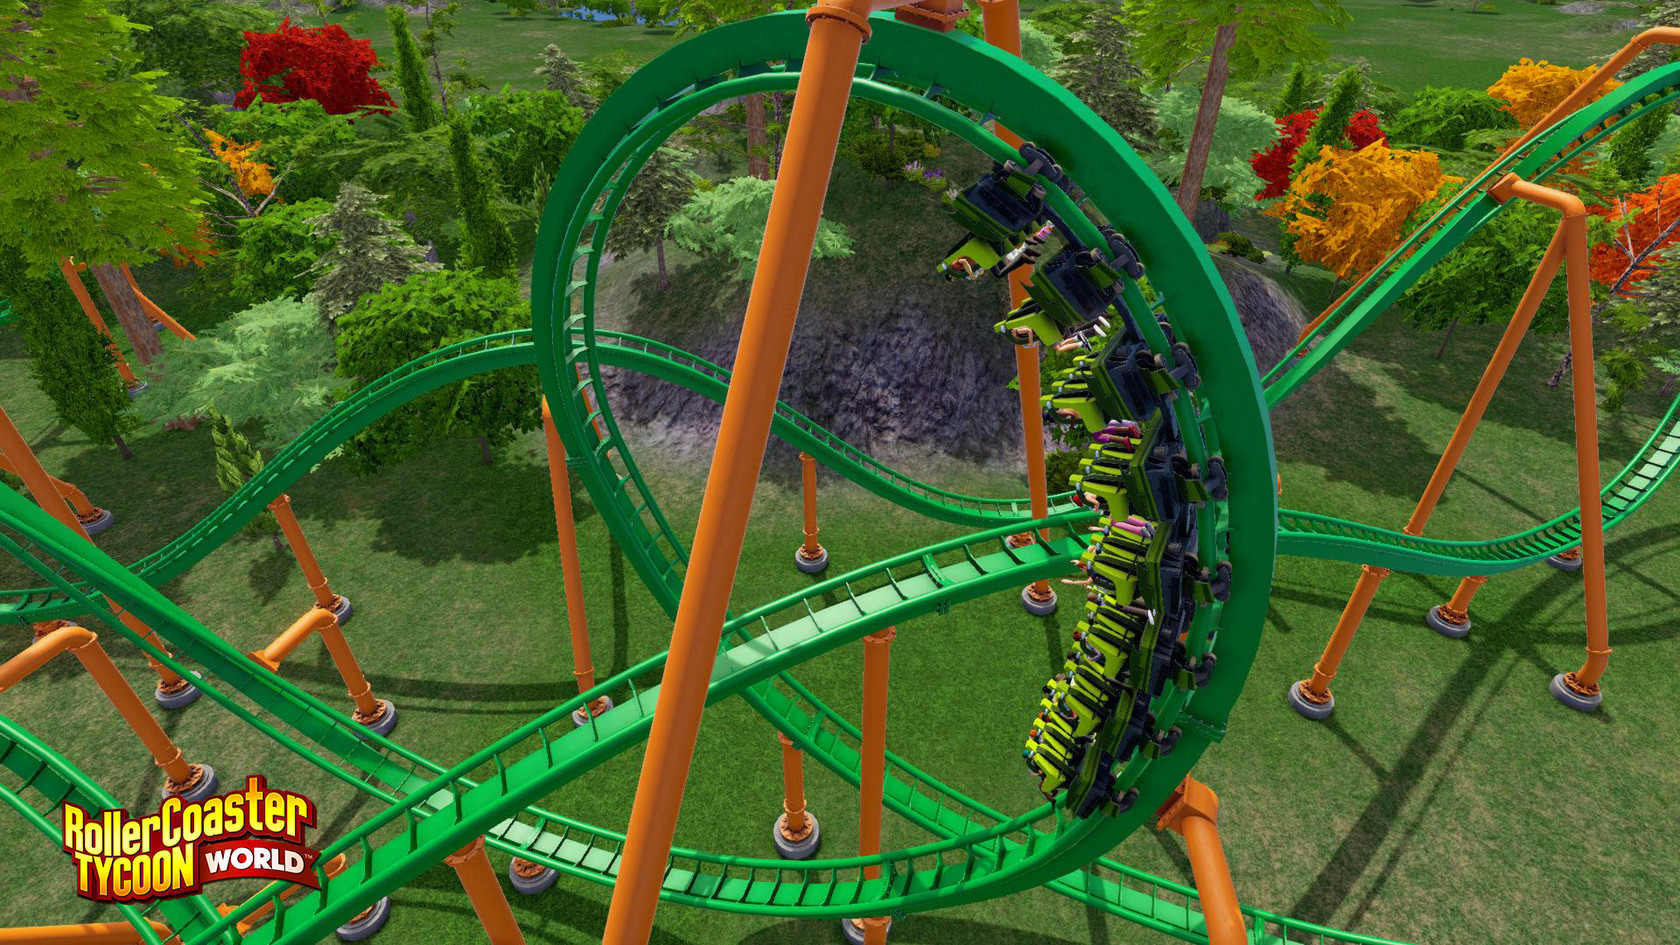 Rollercoaster Tycoon World launches fully on November 16